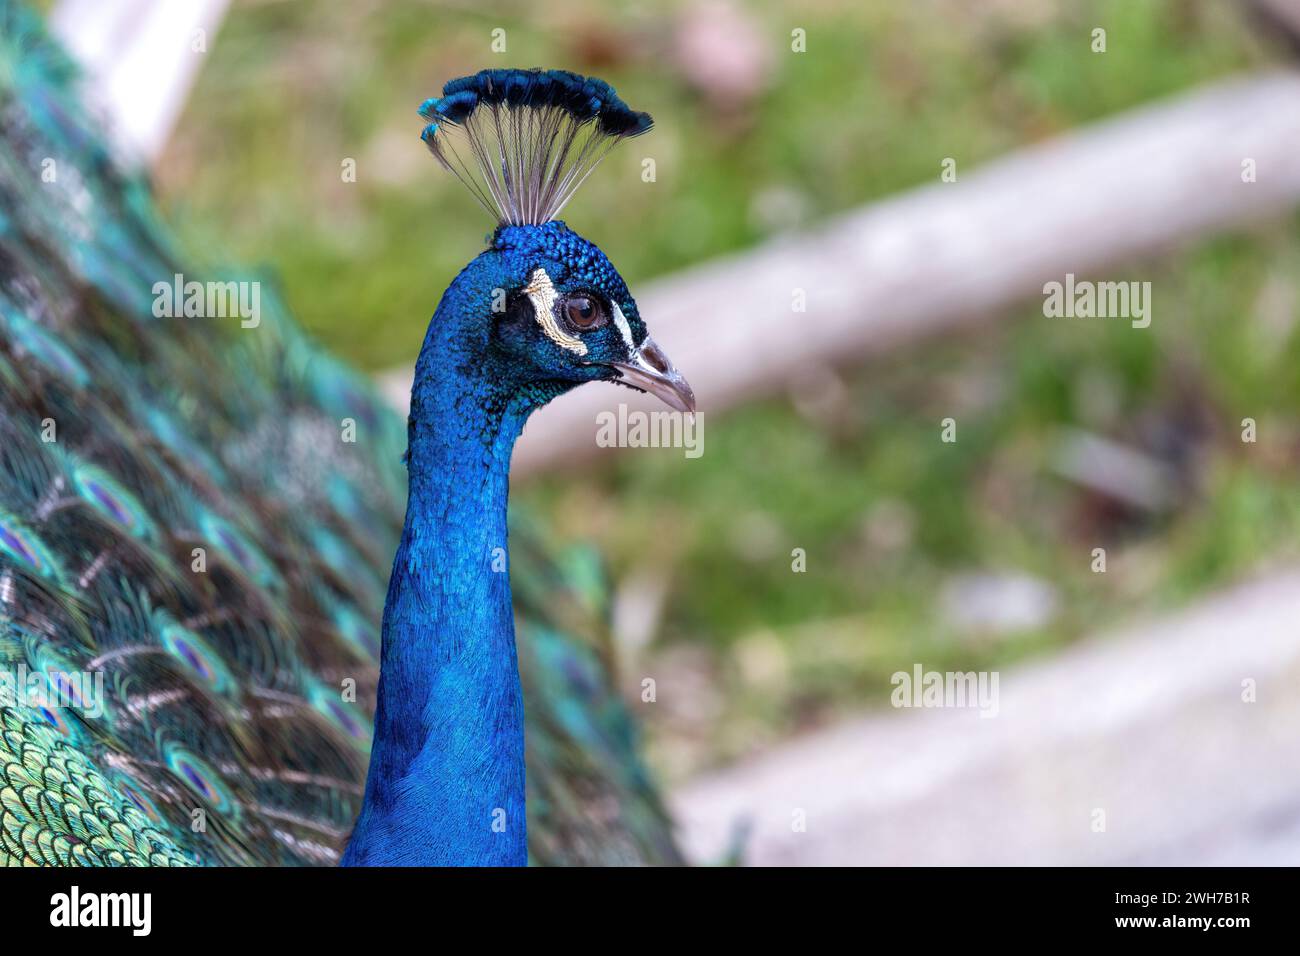 The Common Peafowl (Pavo cristatus), commonly known as the Peacock, found in Delhi, India, is famed for its extravagant plumage and majestic tail disp Stock Photo